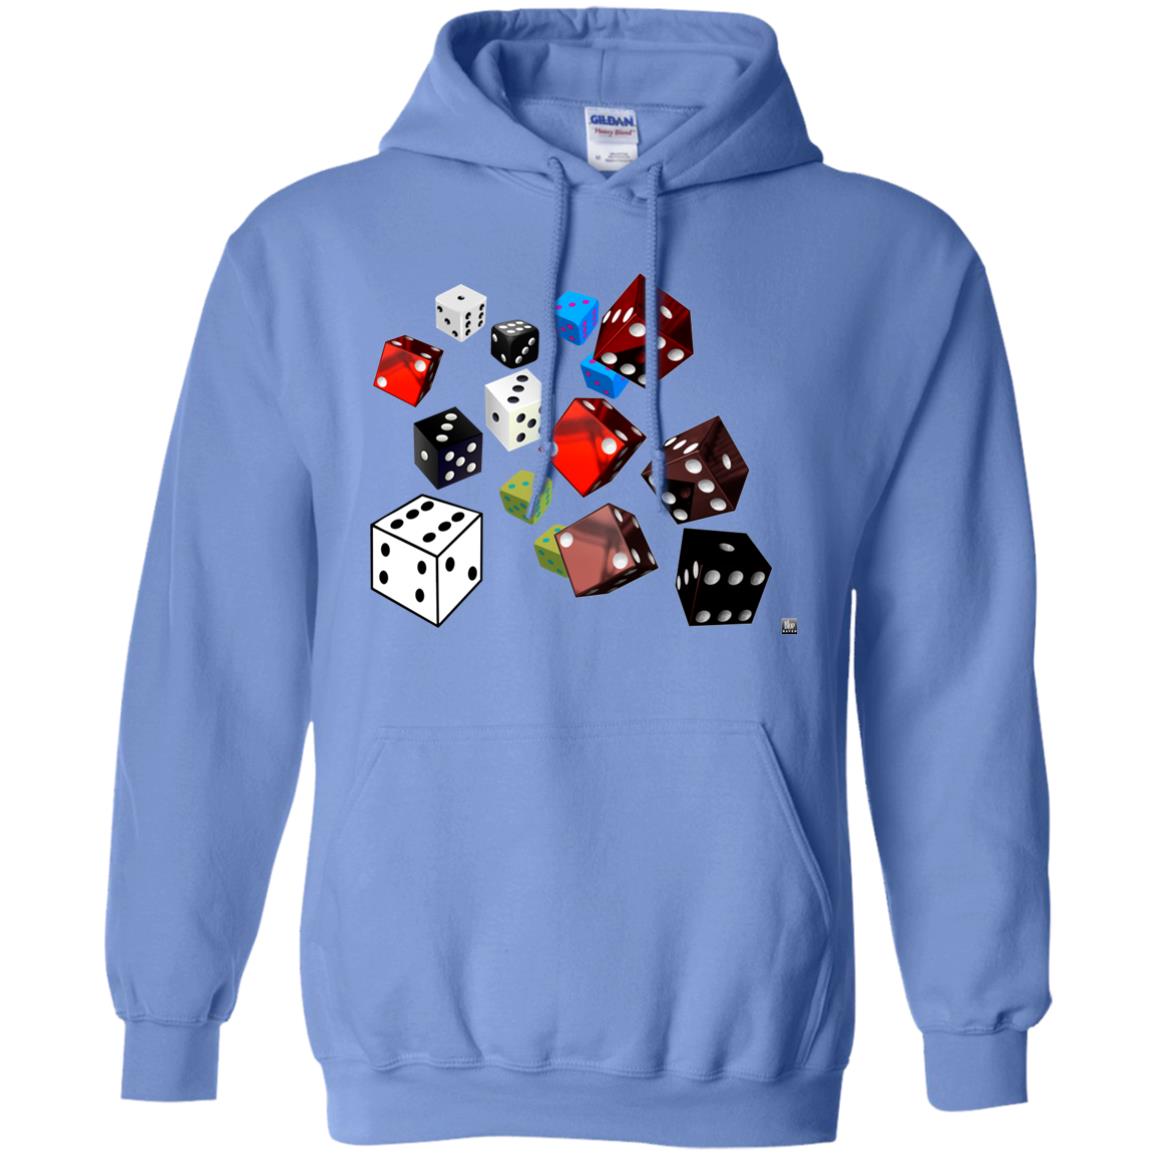 roll of the dice - Adult Hoodie